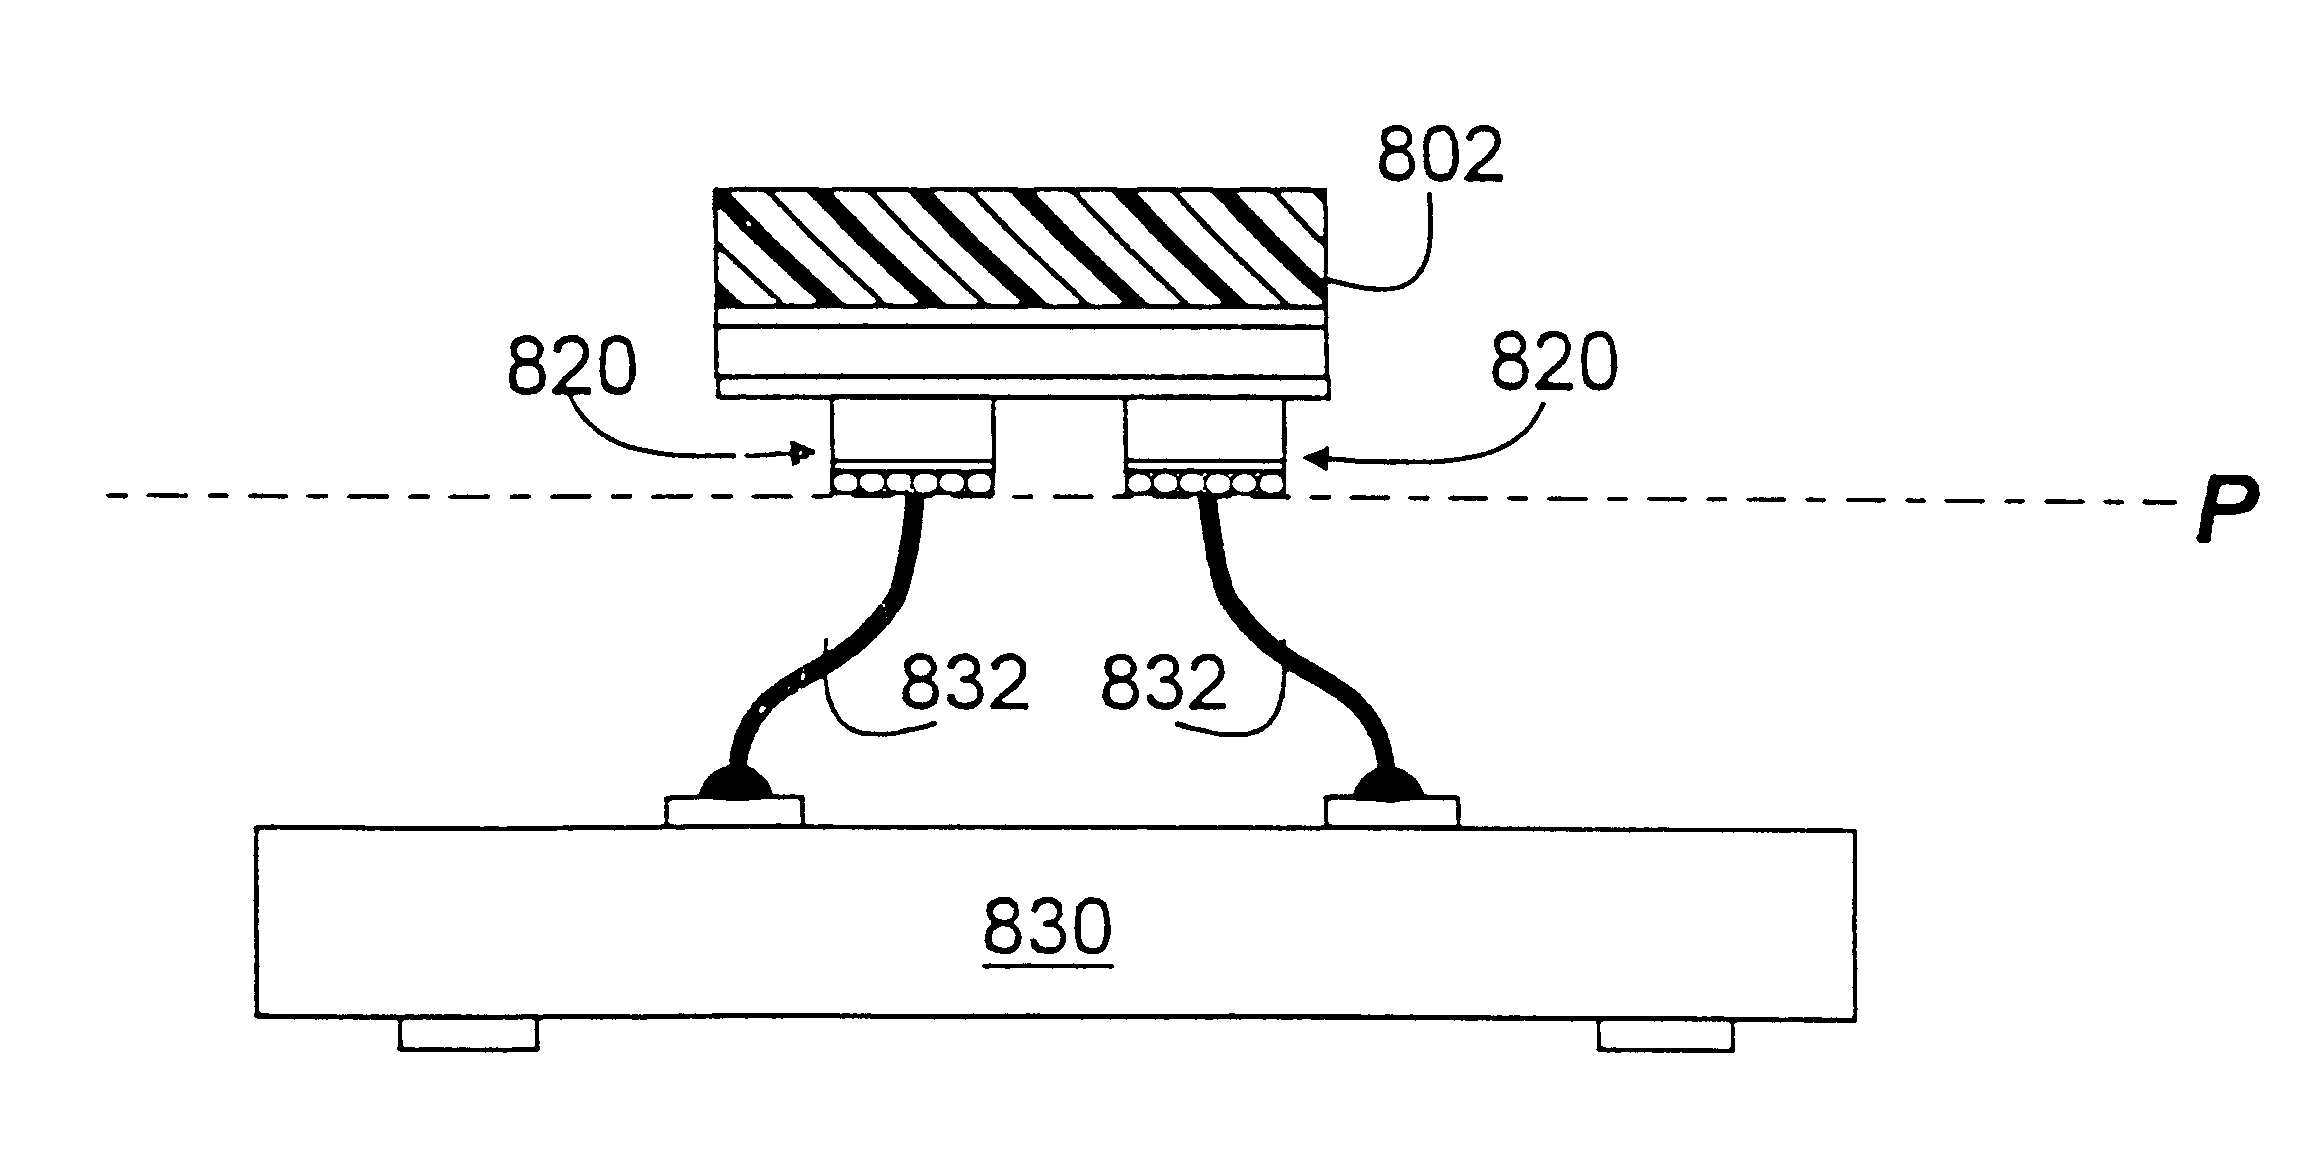 Probe card assembly and kit, and methods of using same